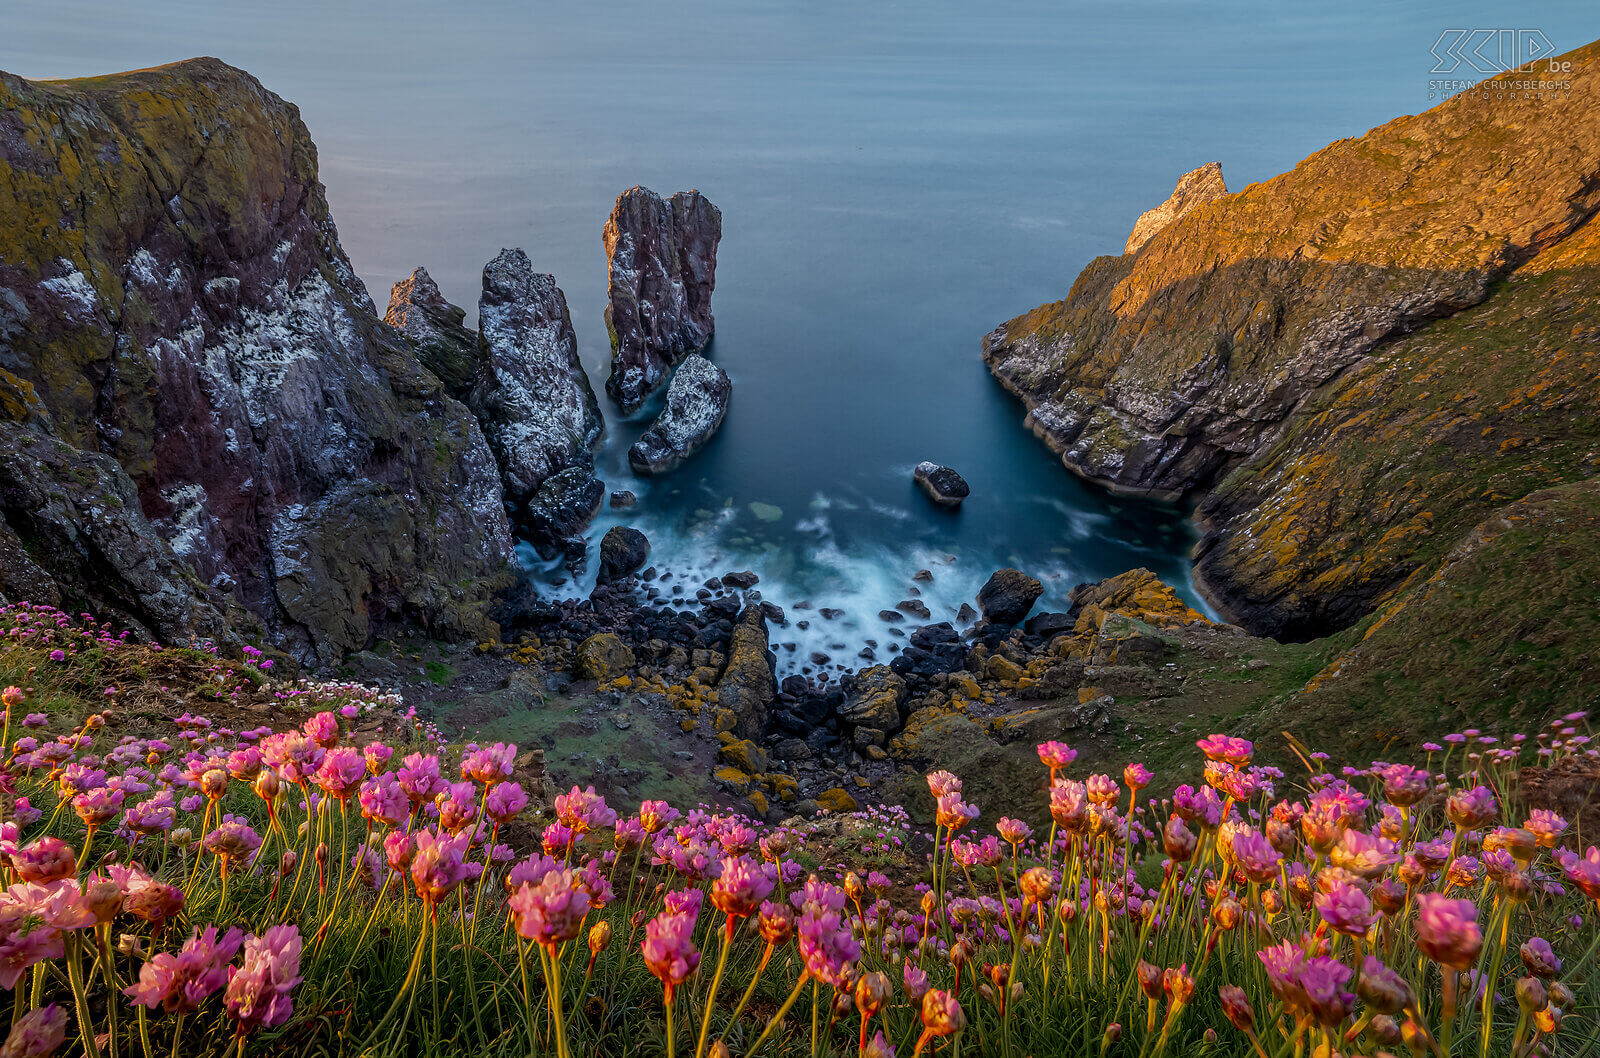 St Abbs Head The stunning cliffs with flowering sea pink in the nature reserve of St Abbs in Berwickshire on the east coast of Scotland. Stefan Cruysberghs